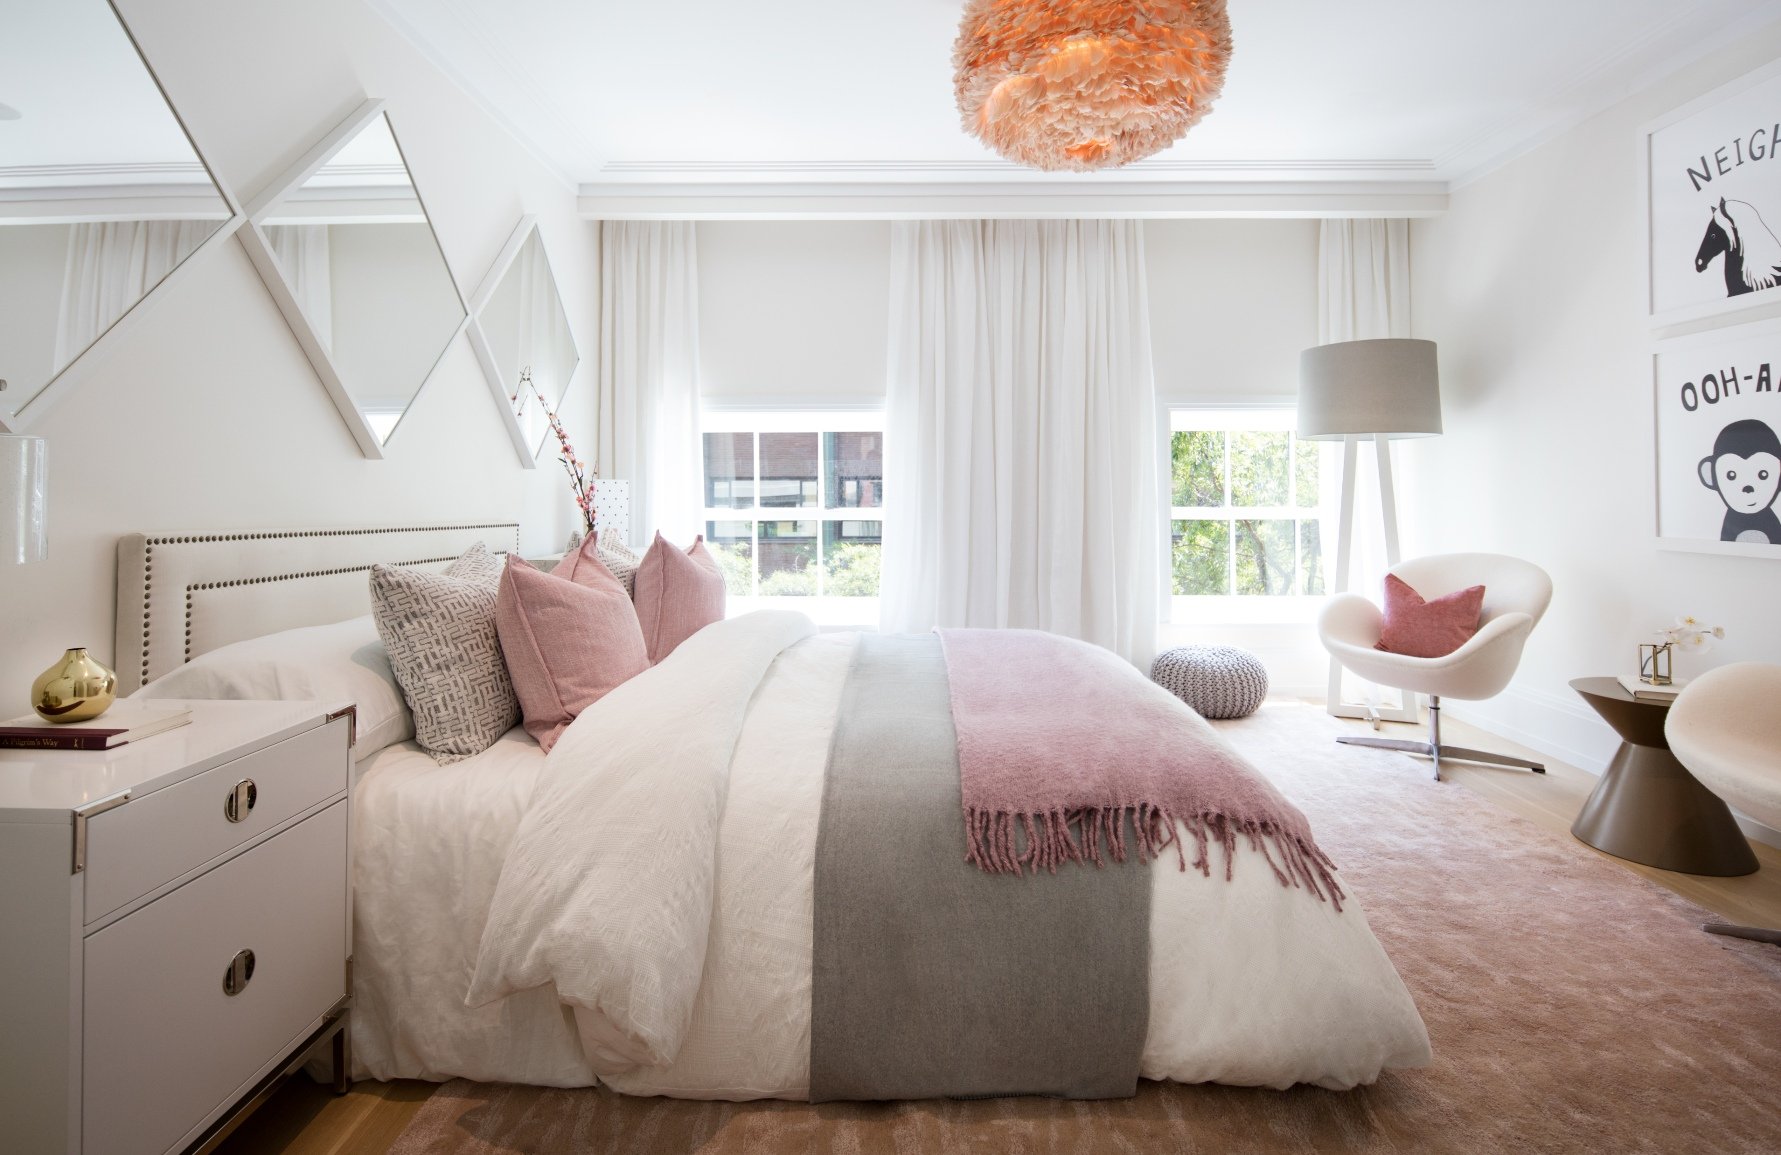 A romantic white bedroom decor with pink color